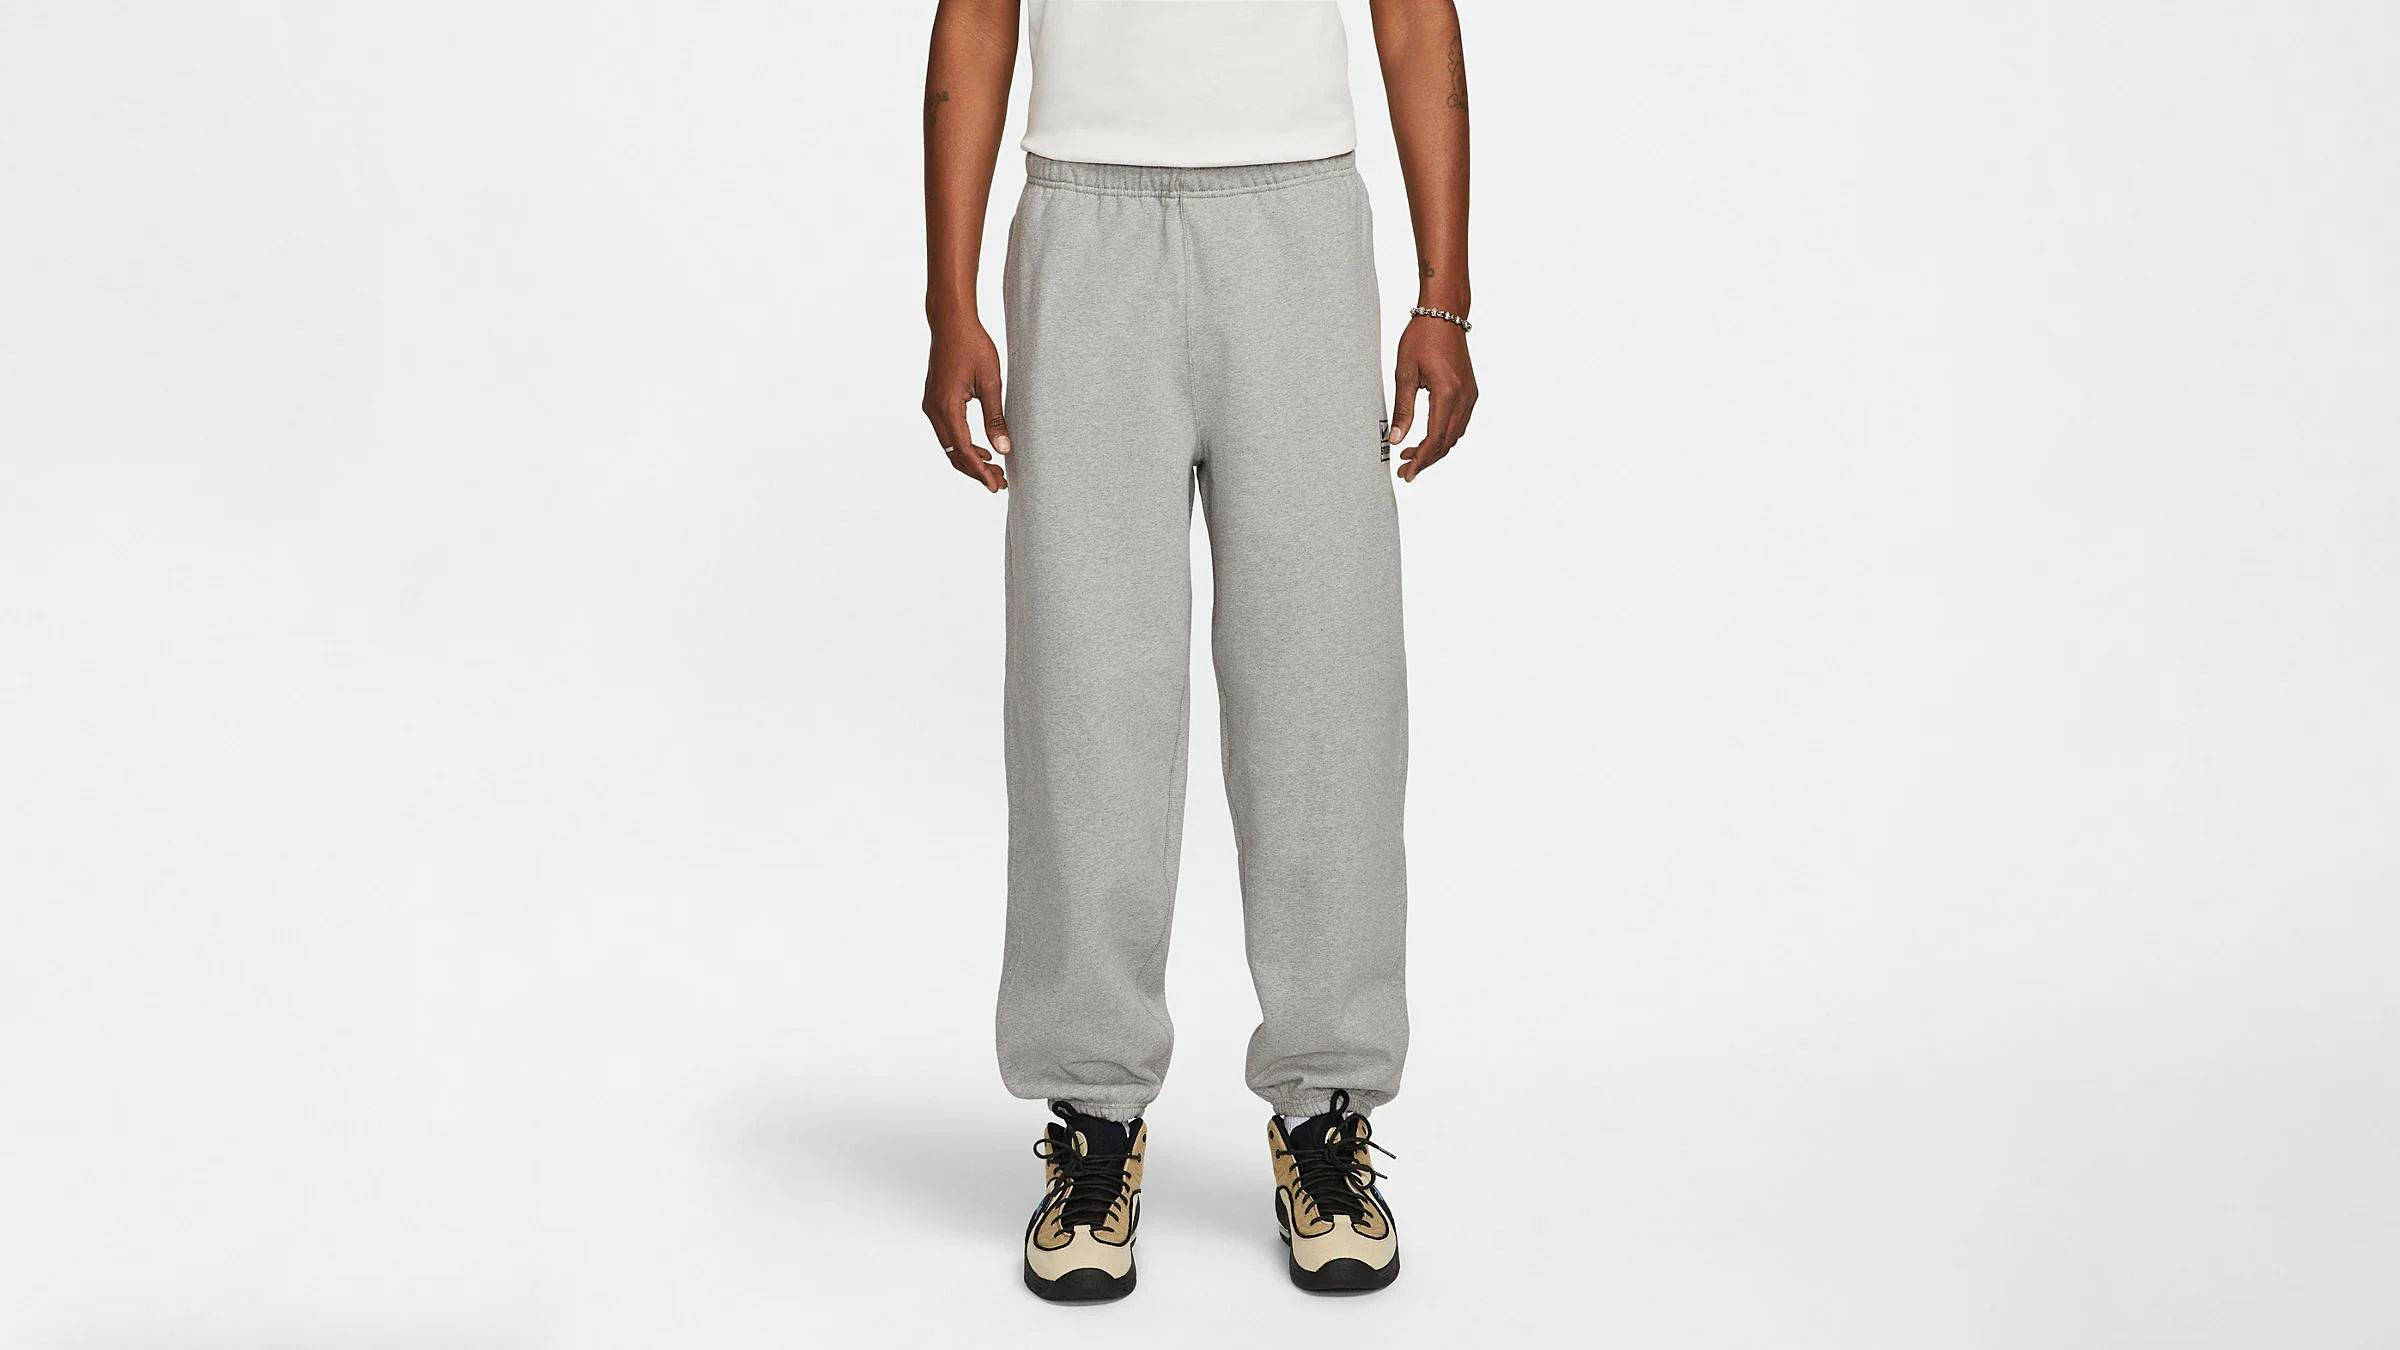 Nike x Stussy Sweat Pant | Where To Buy | do9340-063 | The Sole 